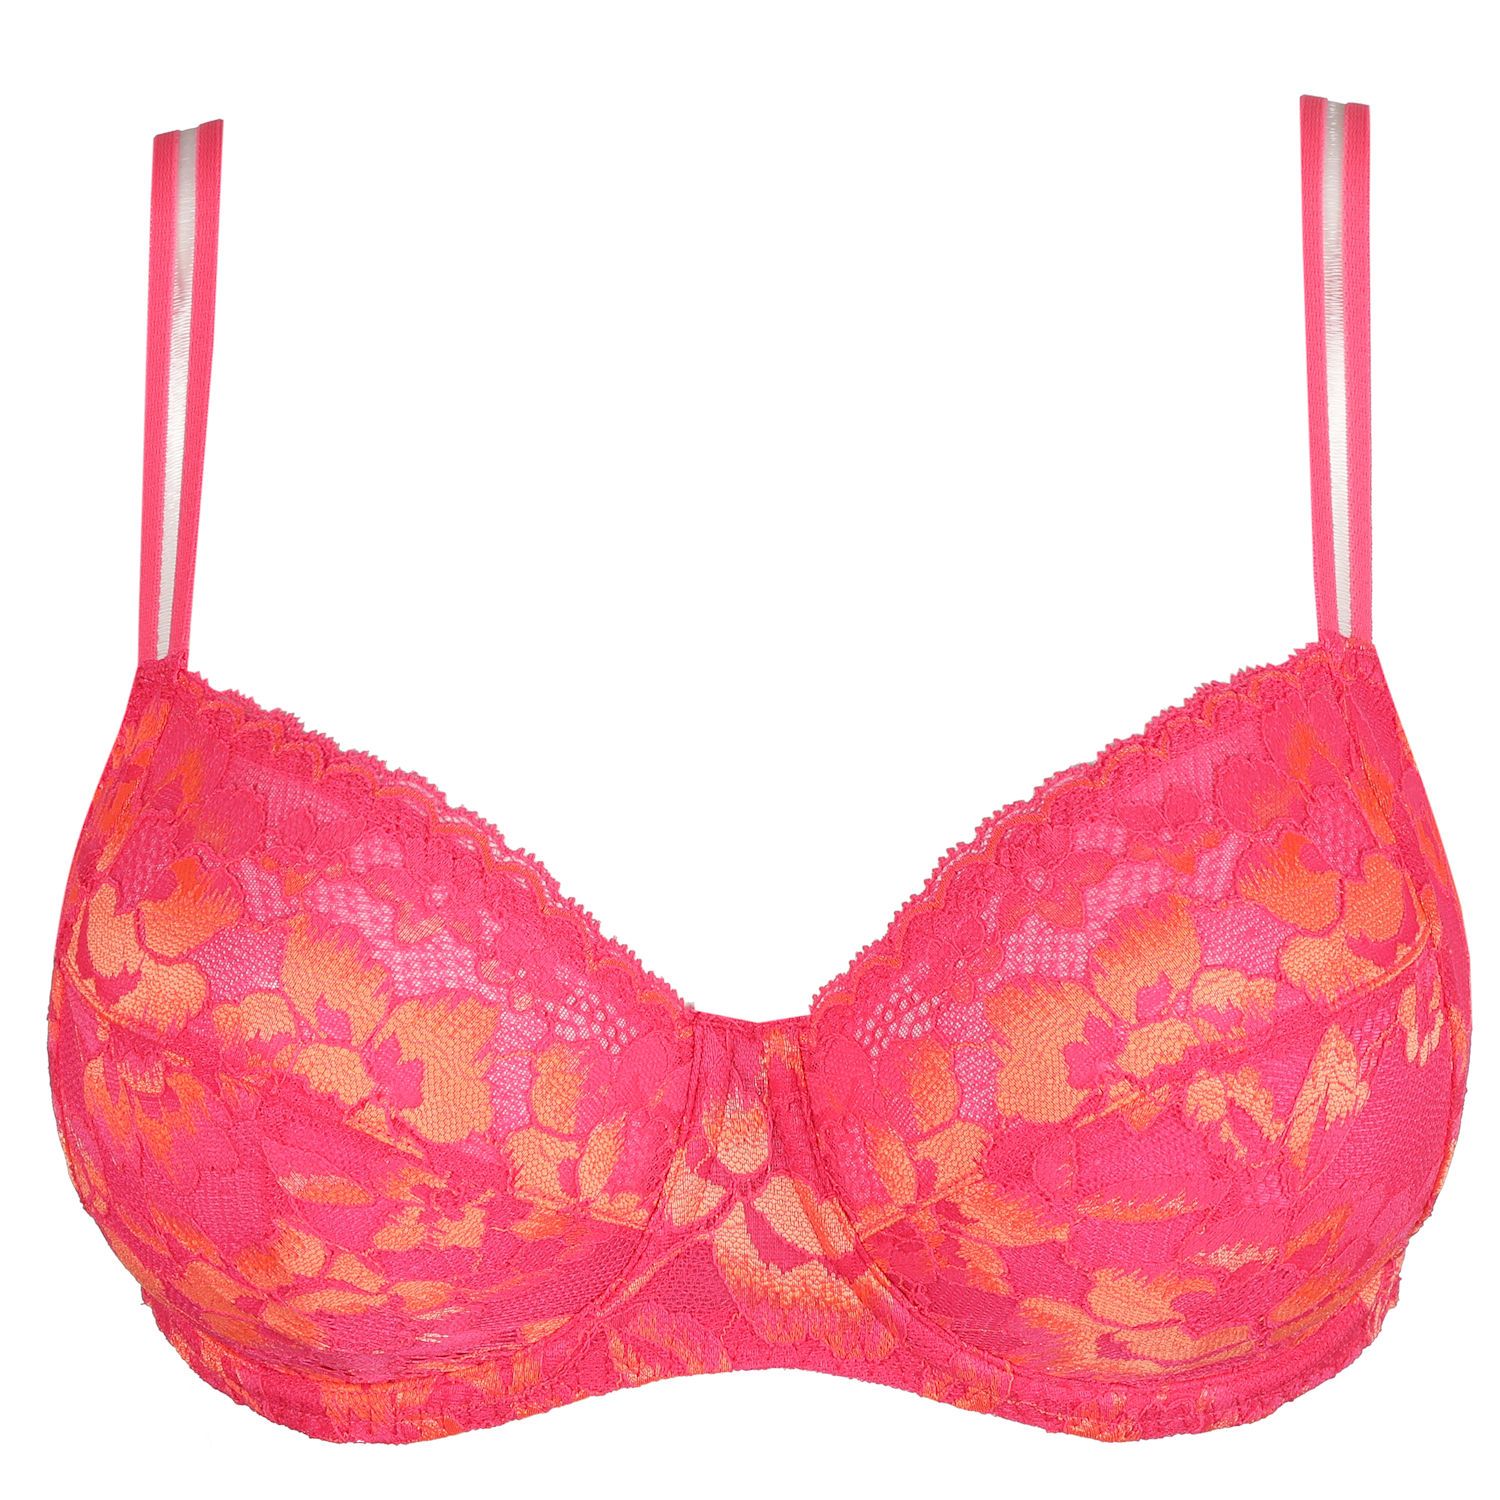 Non-padded underwired lace bra - Light pink - Ladies